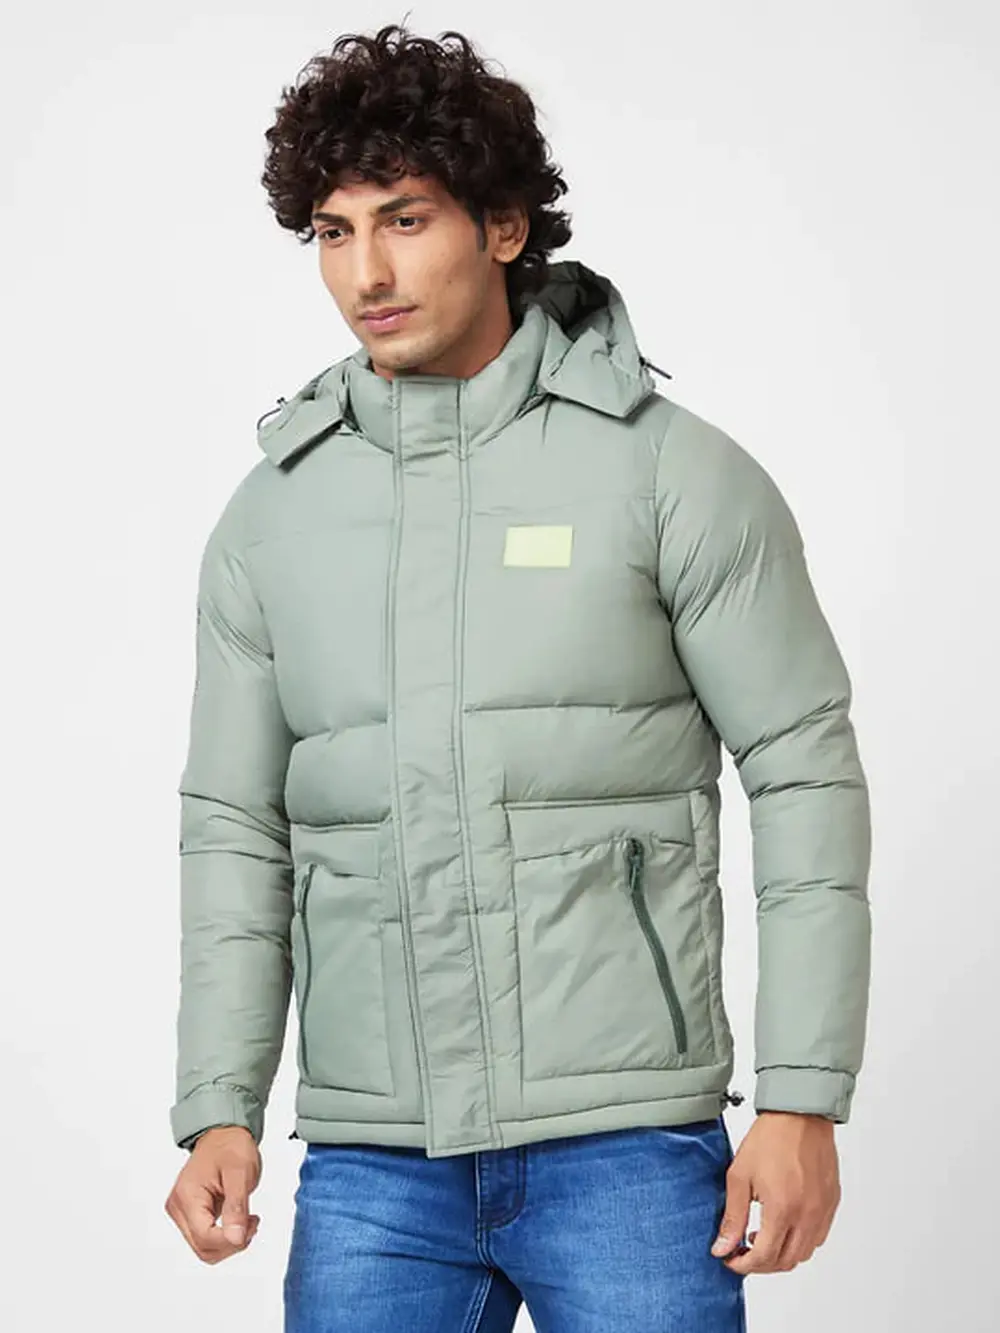 Men'S Puffer Jacket With Zipper Patch Pocket & Printed Details On Sleeves